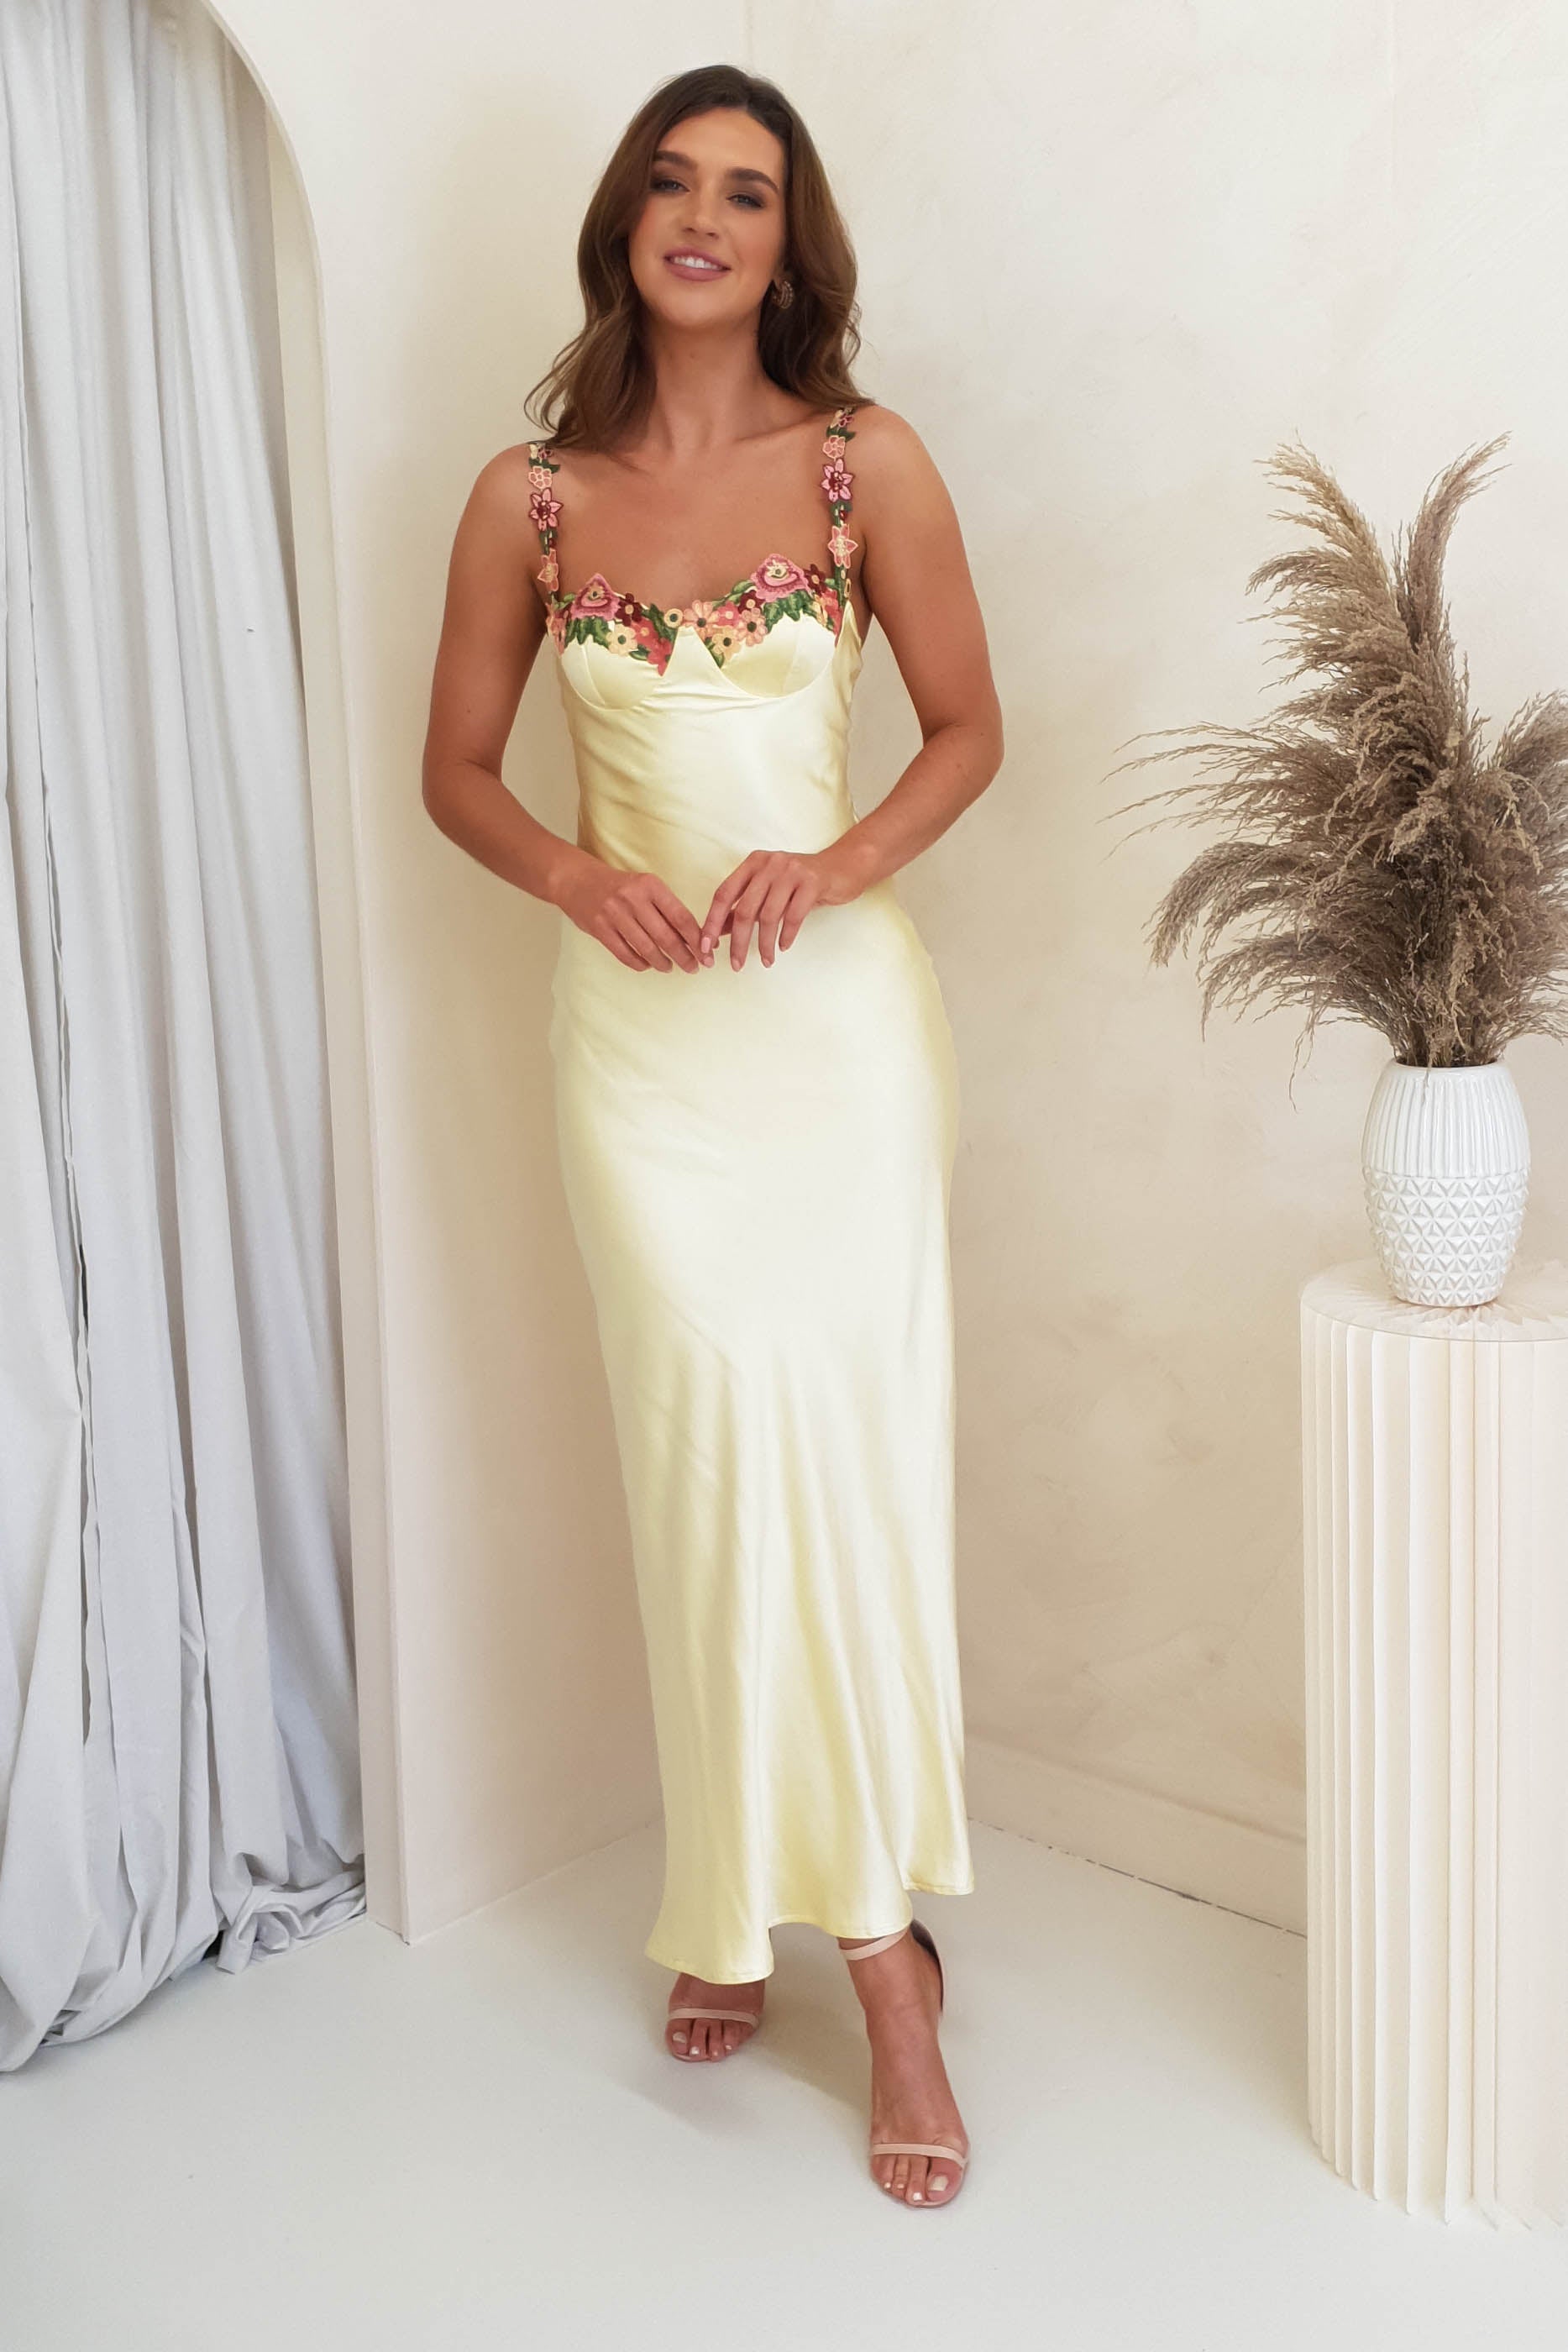 Simple Sheath Cowl Neck Slip Silk Satin Maxi Prom Evening Dresses,982 ·  muttie dresses · Online Store Powered by Storenvy